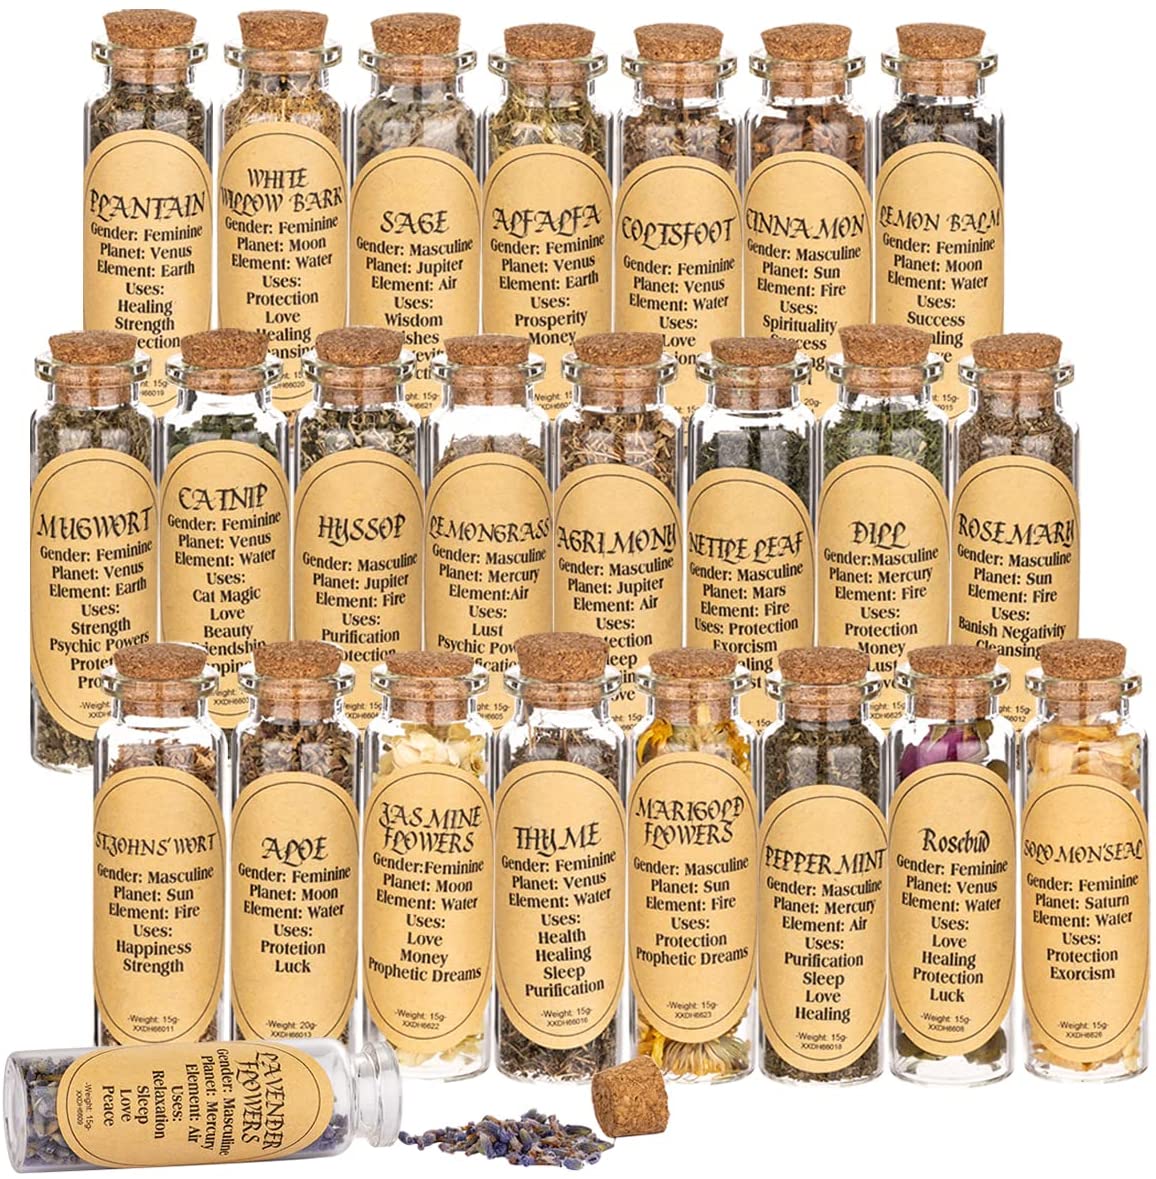 Witchcraft Supplies, 24 Bottles Herbs for Witchcraft, Dried Herbs for Witchcraft, Pagan, Rituals, Witch Spells, Wiccan Supplies and Tools